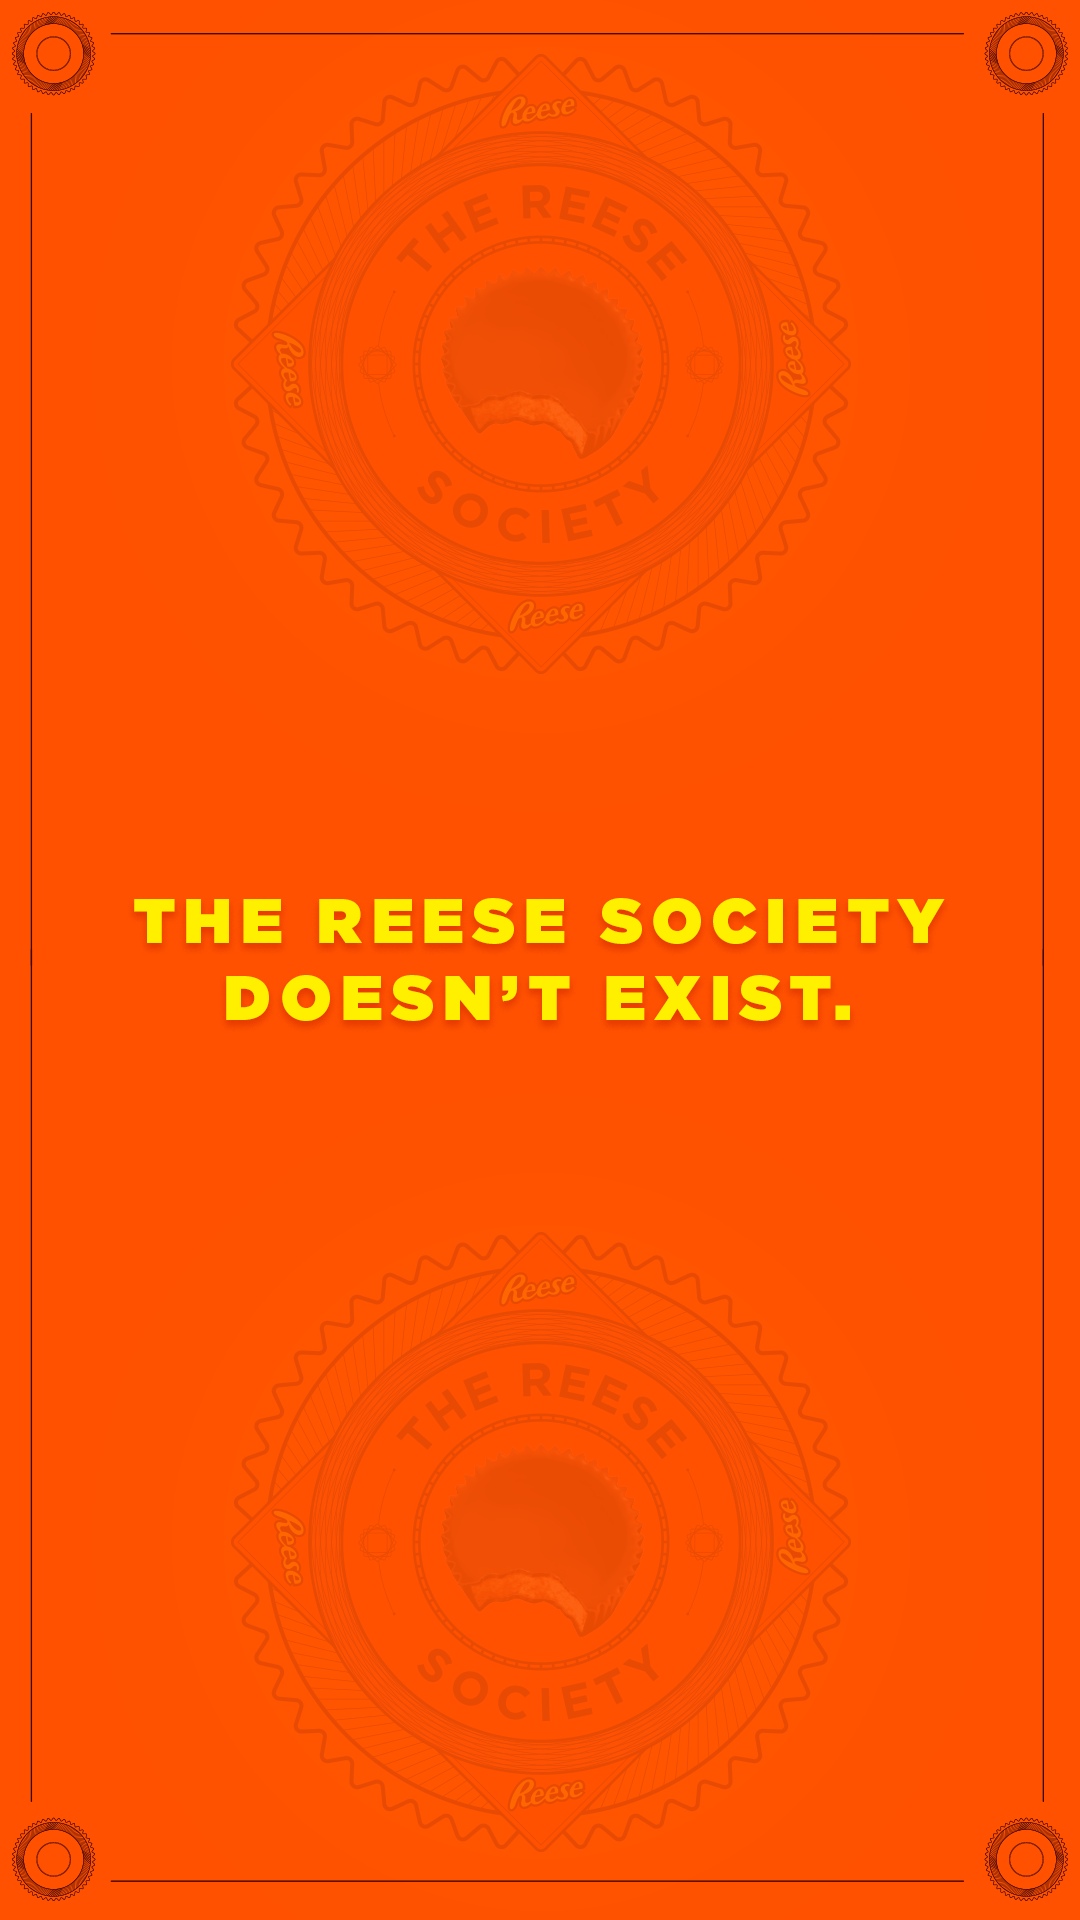 Reese-Society-IG_0072_The-Reese-Society-doesn’t-exist.png